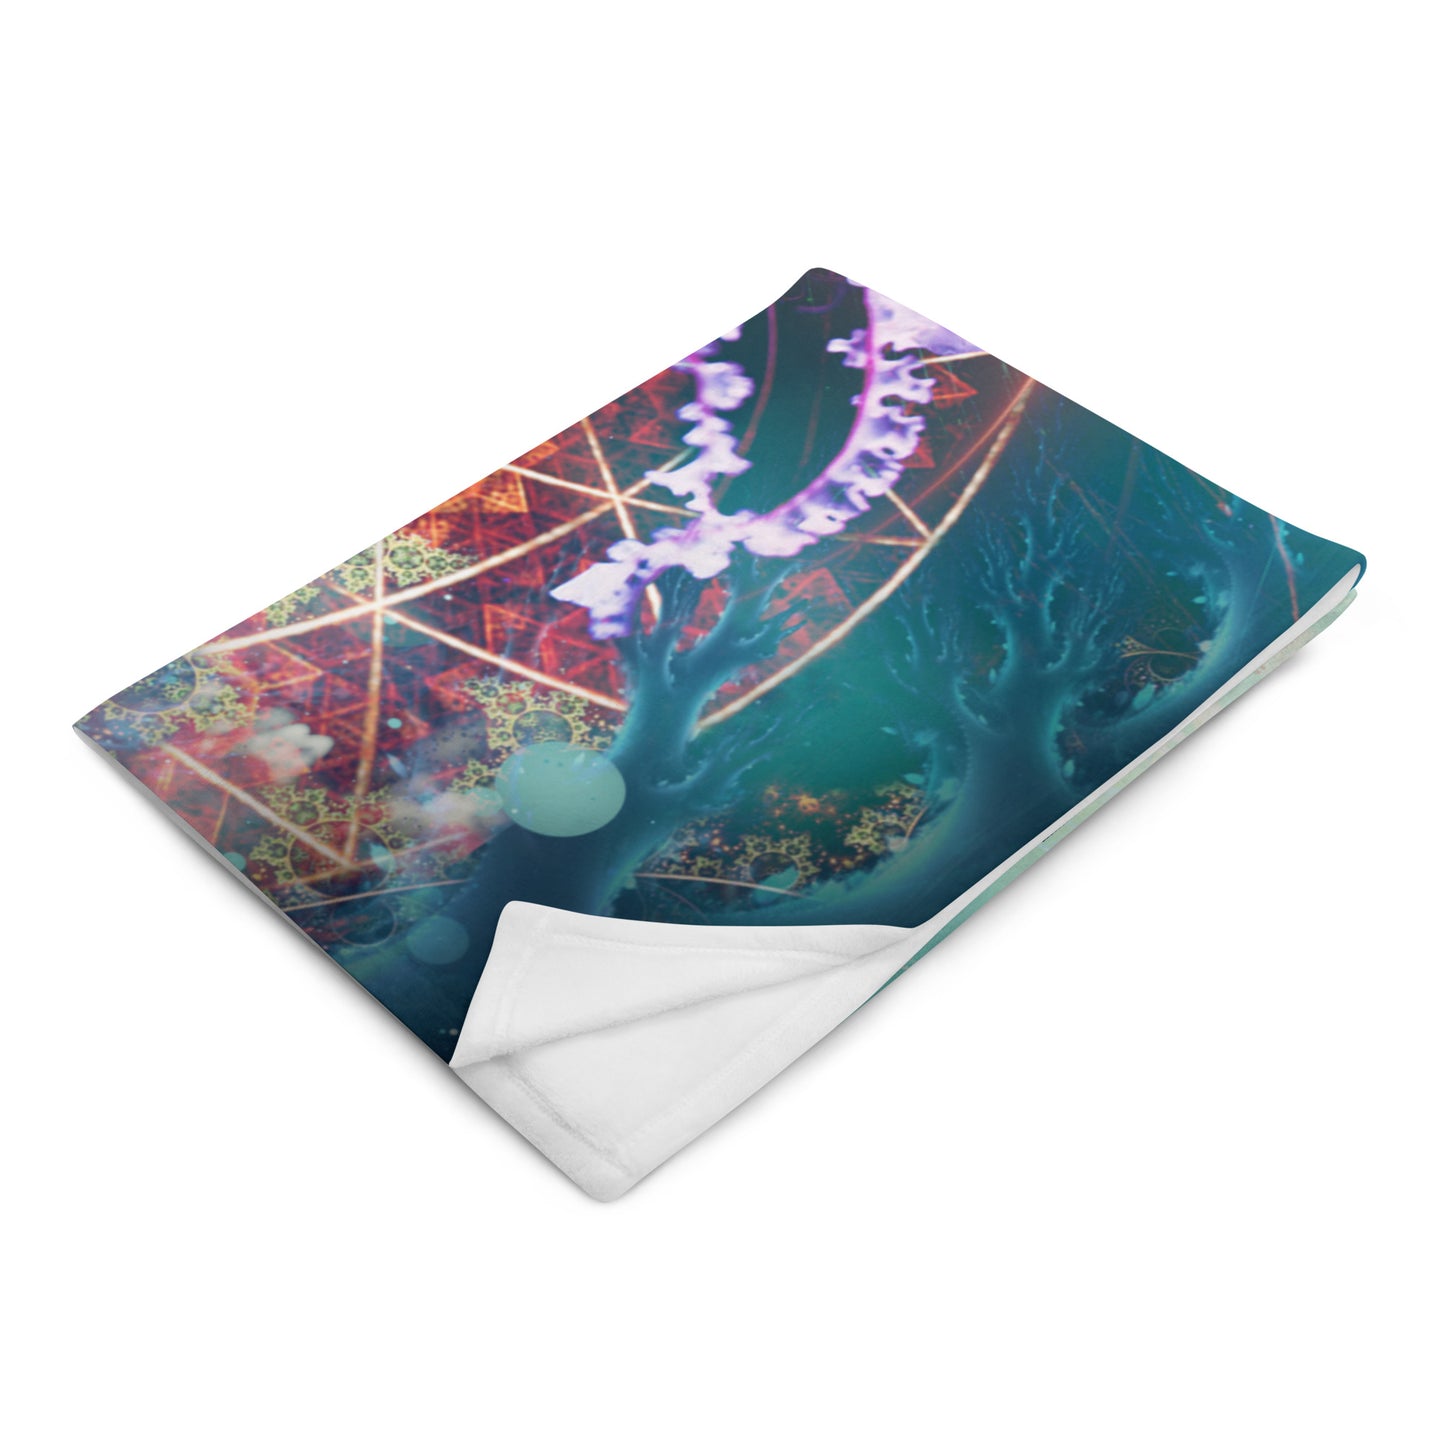 "Primordial Soup" - Psychedelic Jellyfish THROW BLANKET